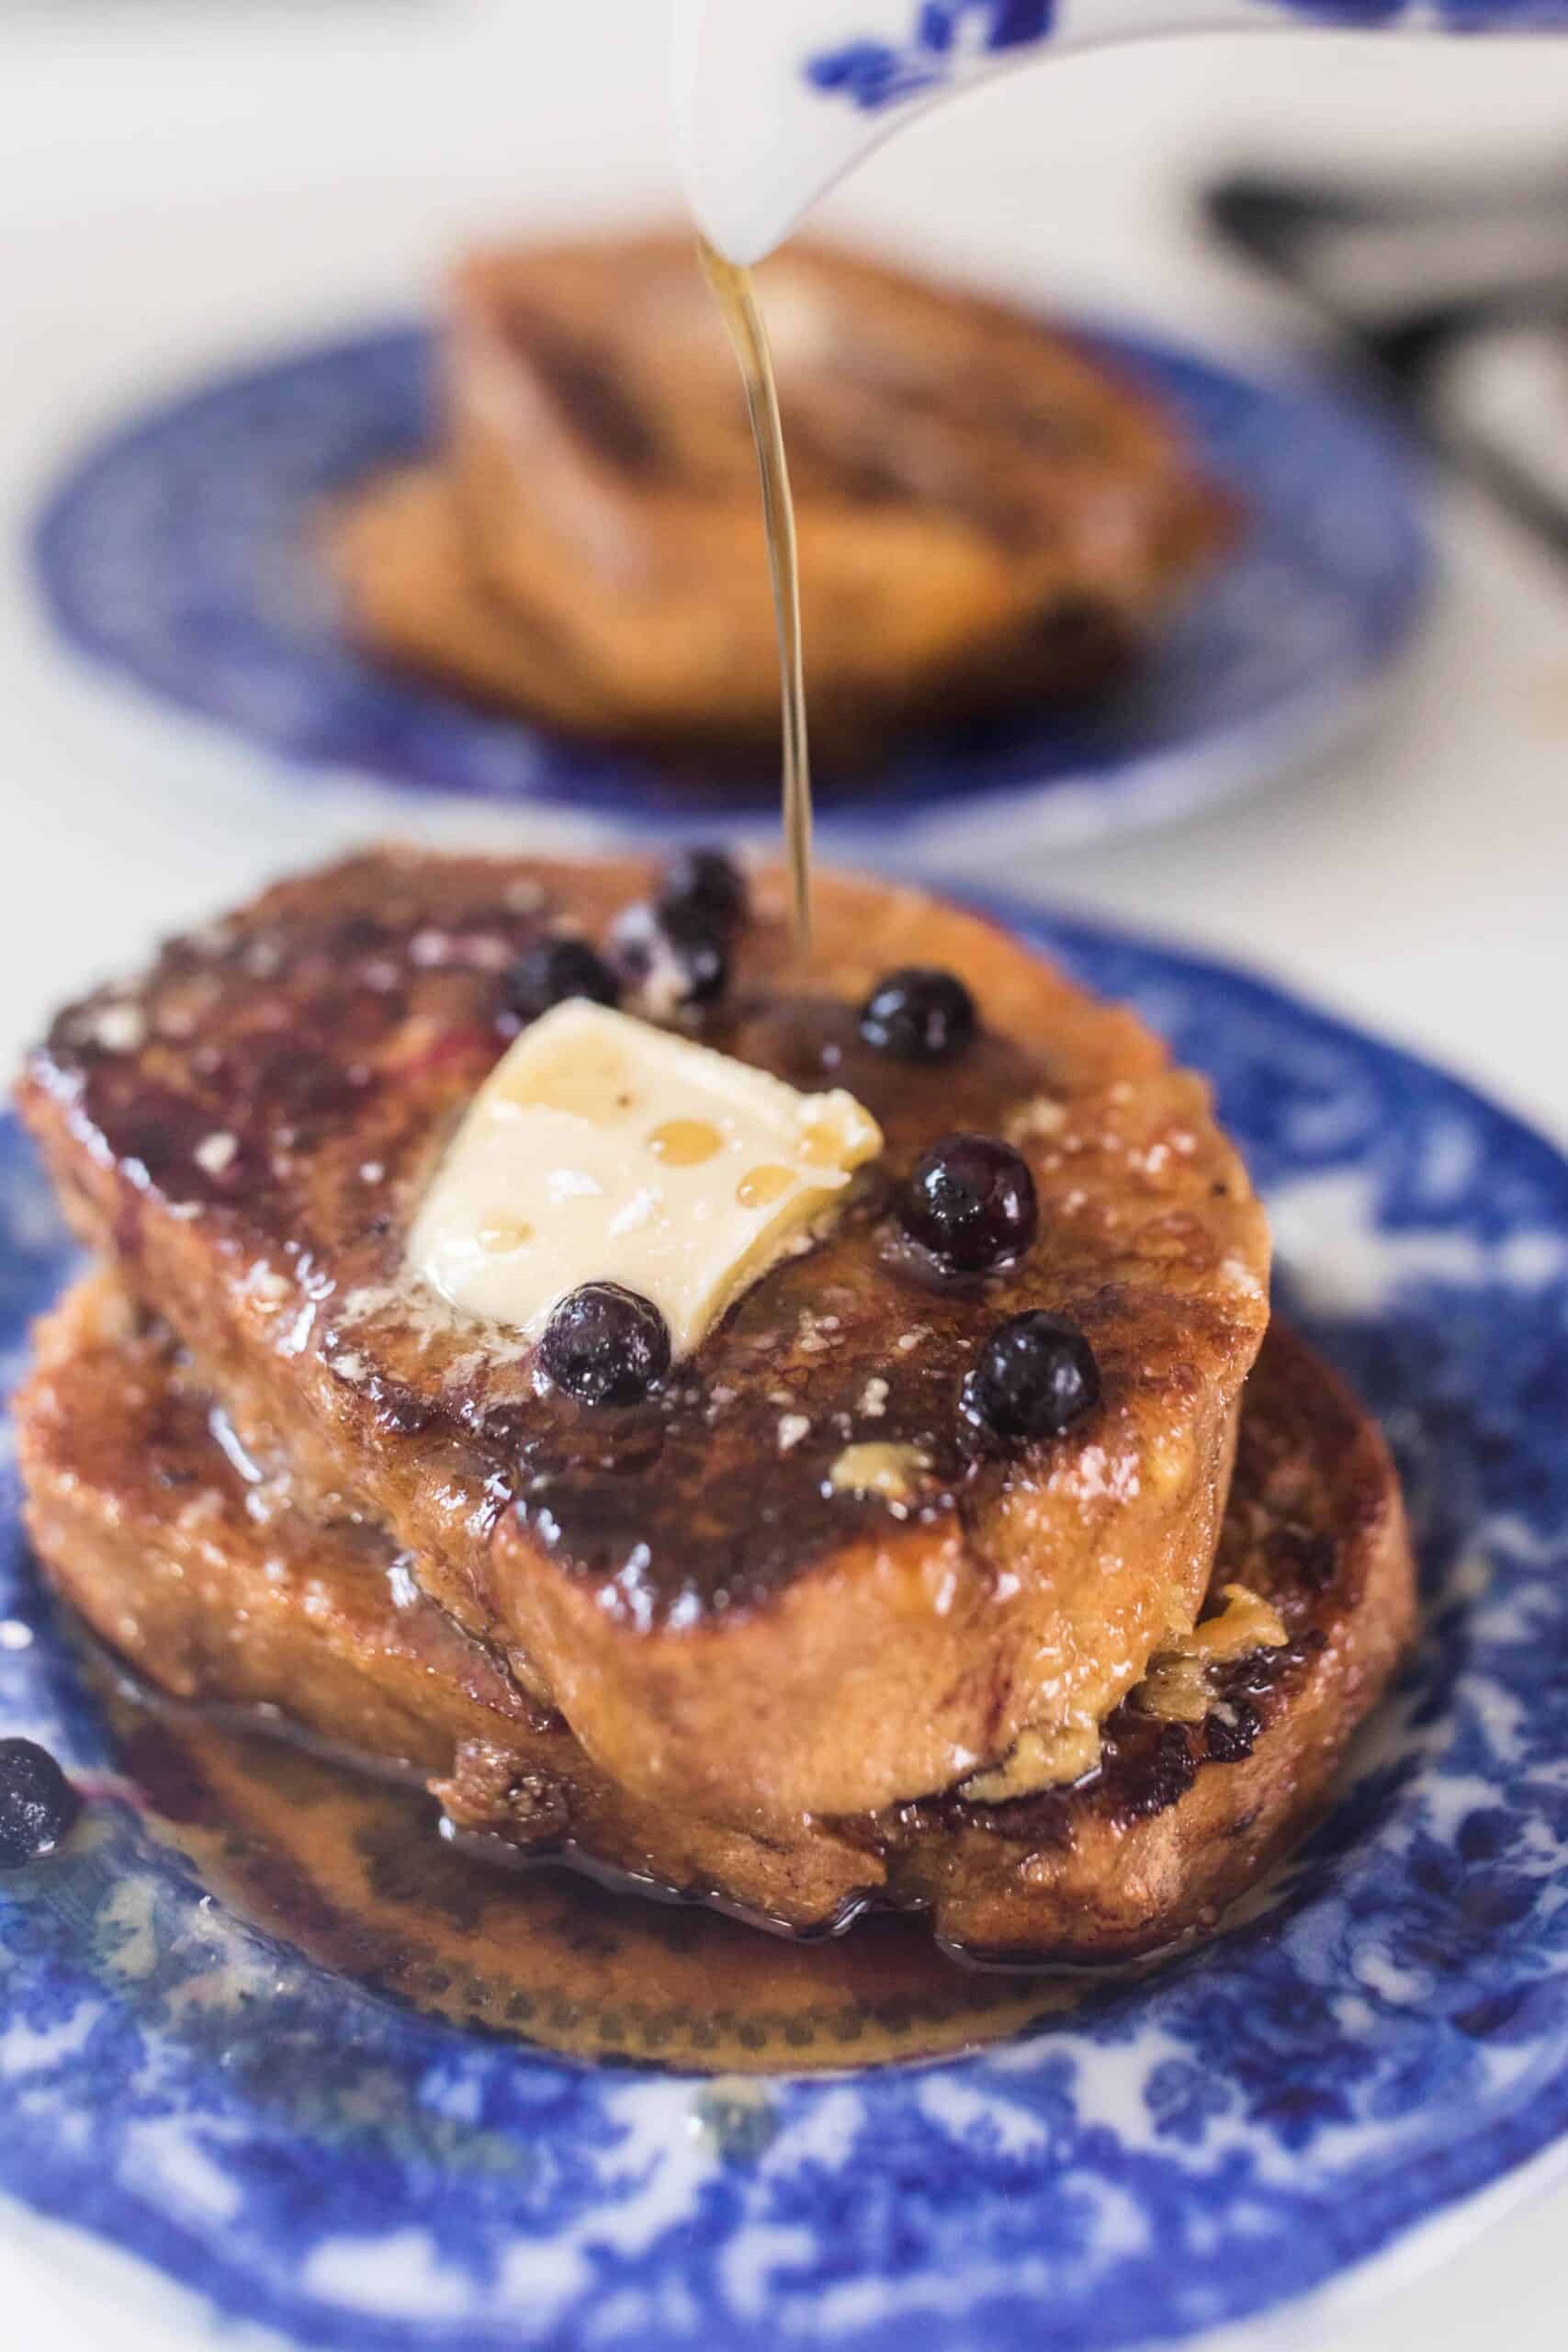 maple syrup being poured over sourdough French toast with blueberries on a blue plate with another plate of French toast in the background